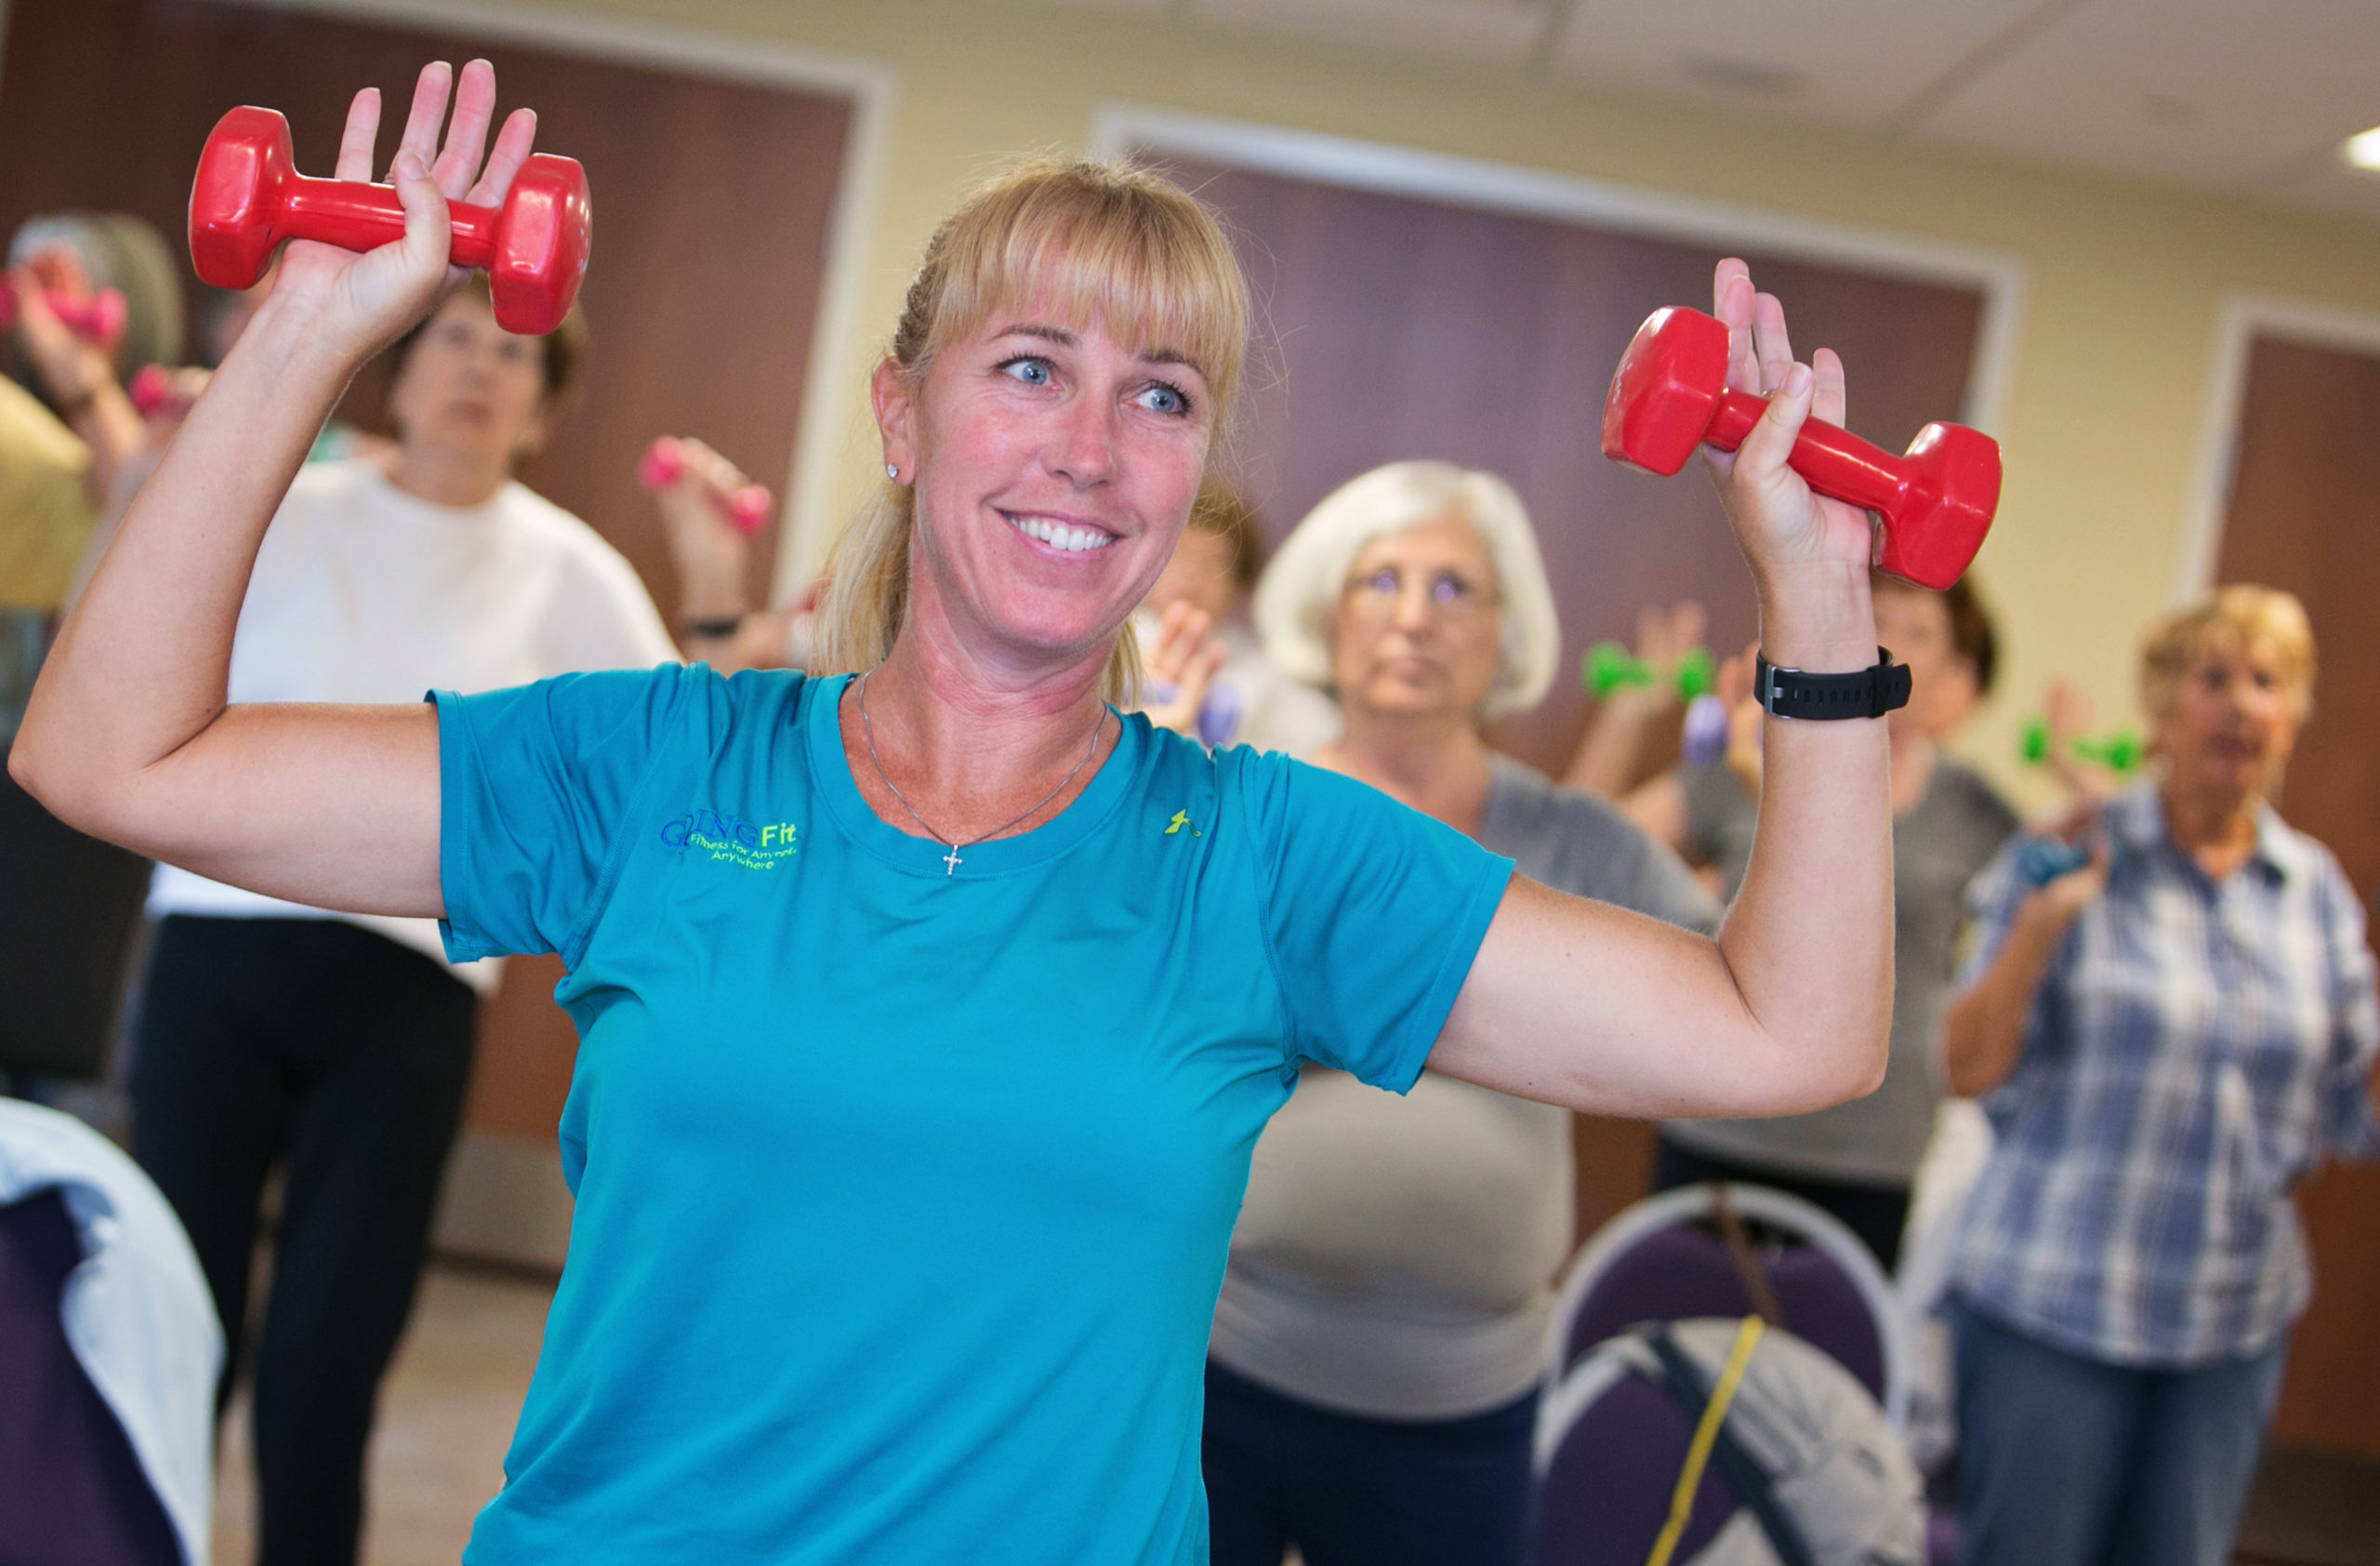 woman exercising with hand weights